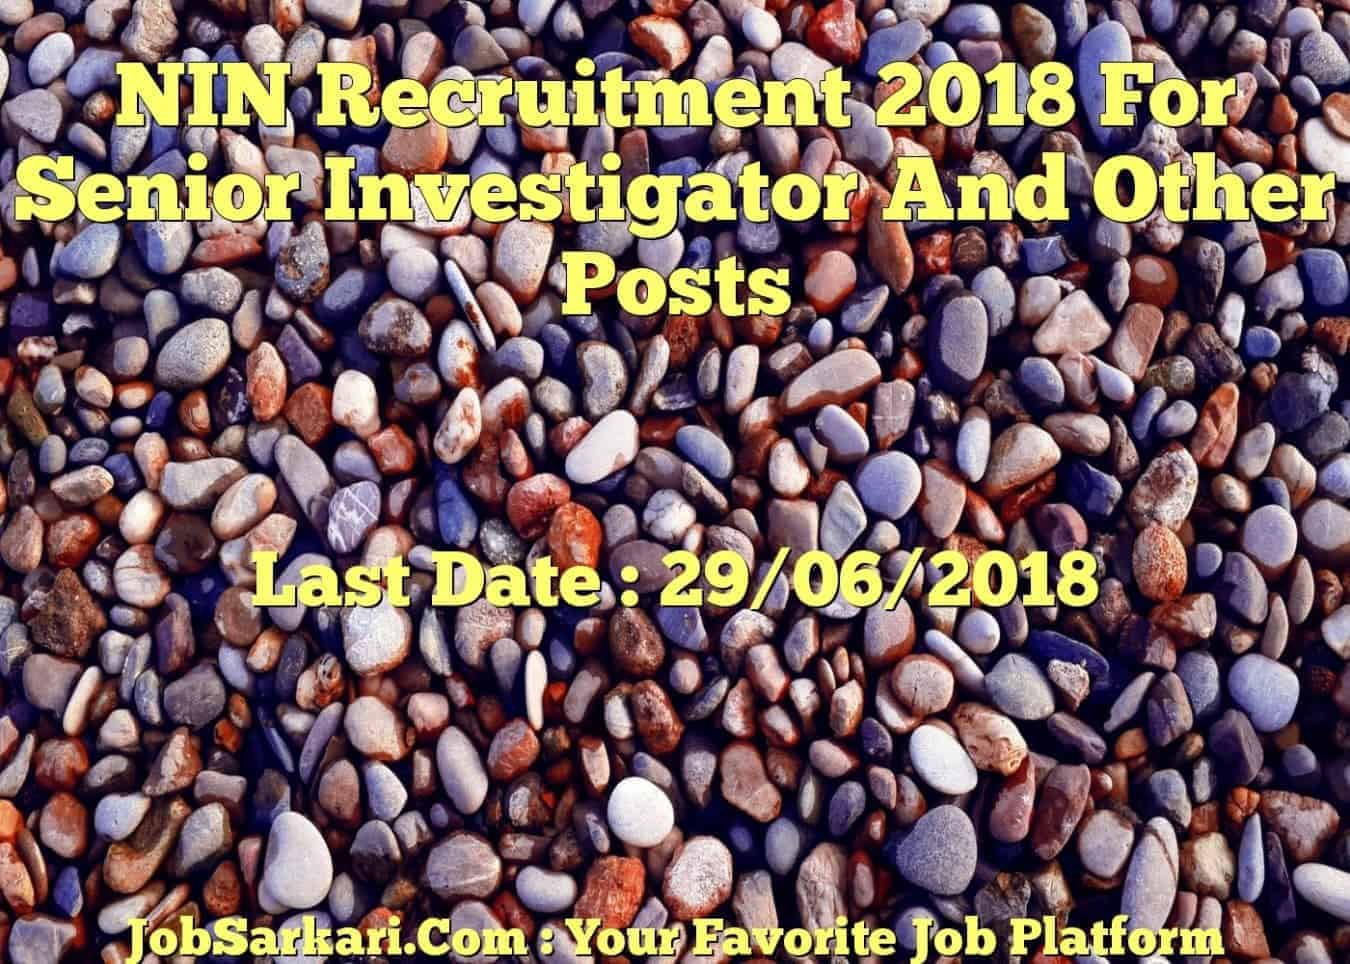 NIN Recruitment 2018 For Senior Investigator And Other Posts